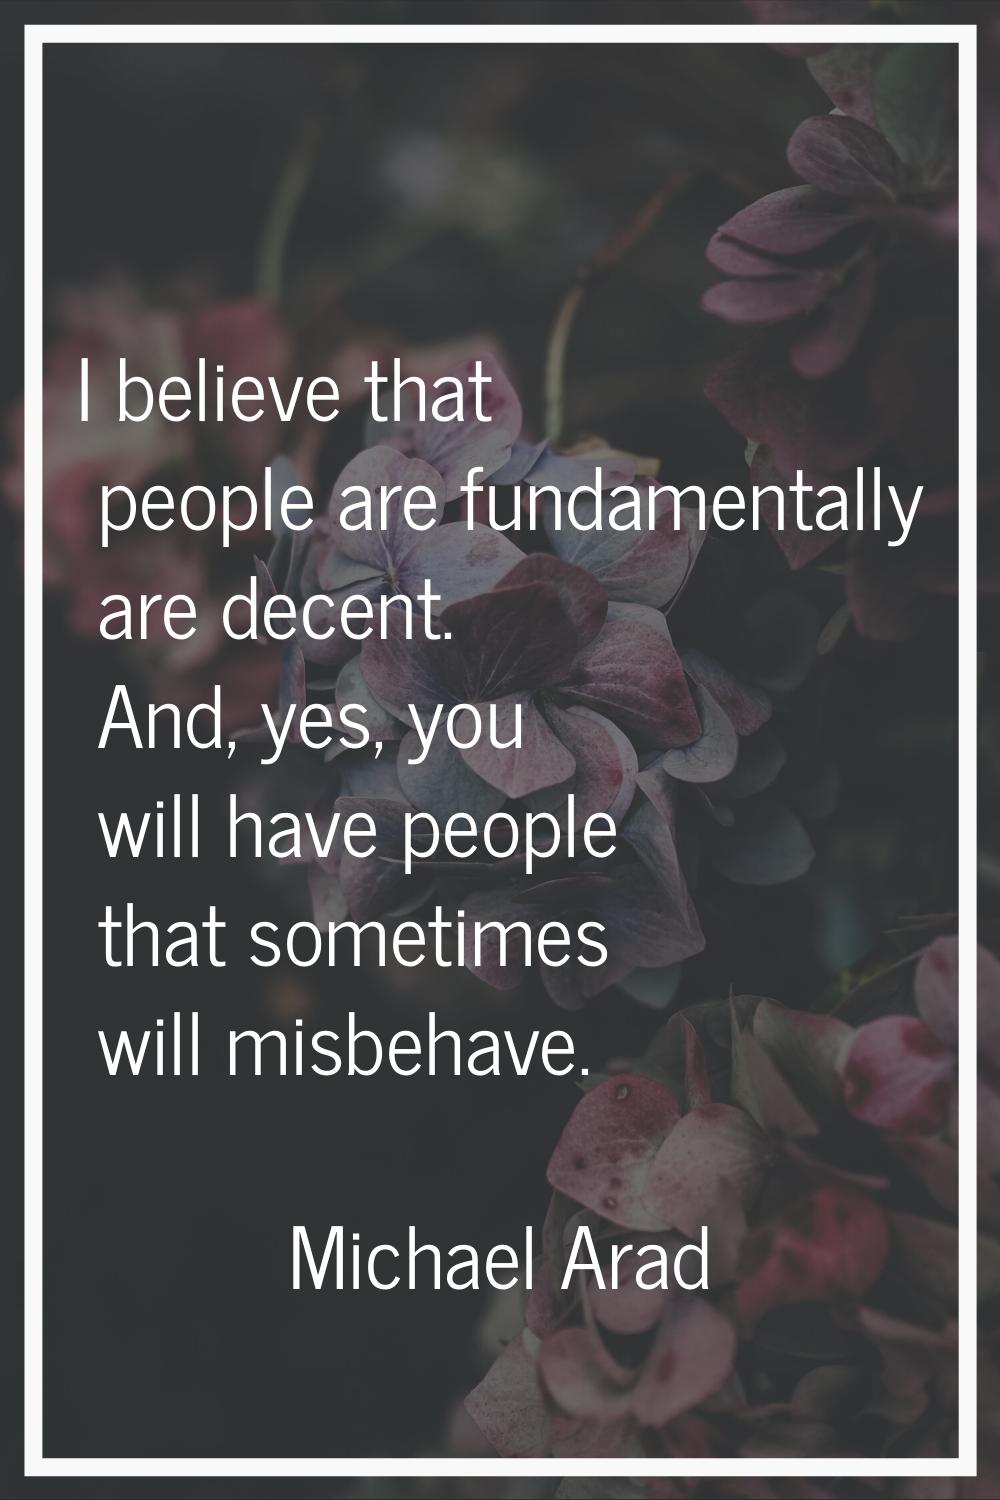 I believe that people are fundamentally are decent. And, yes, you will have people that sometimes w